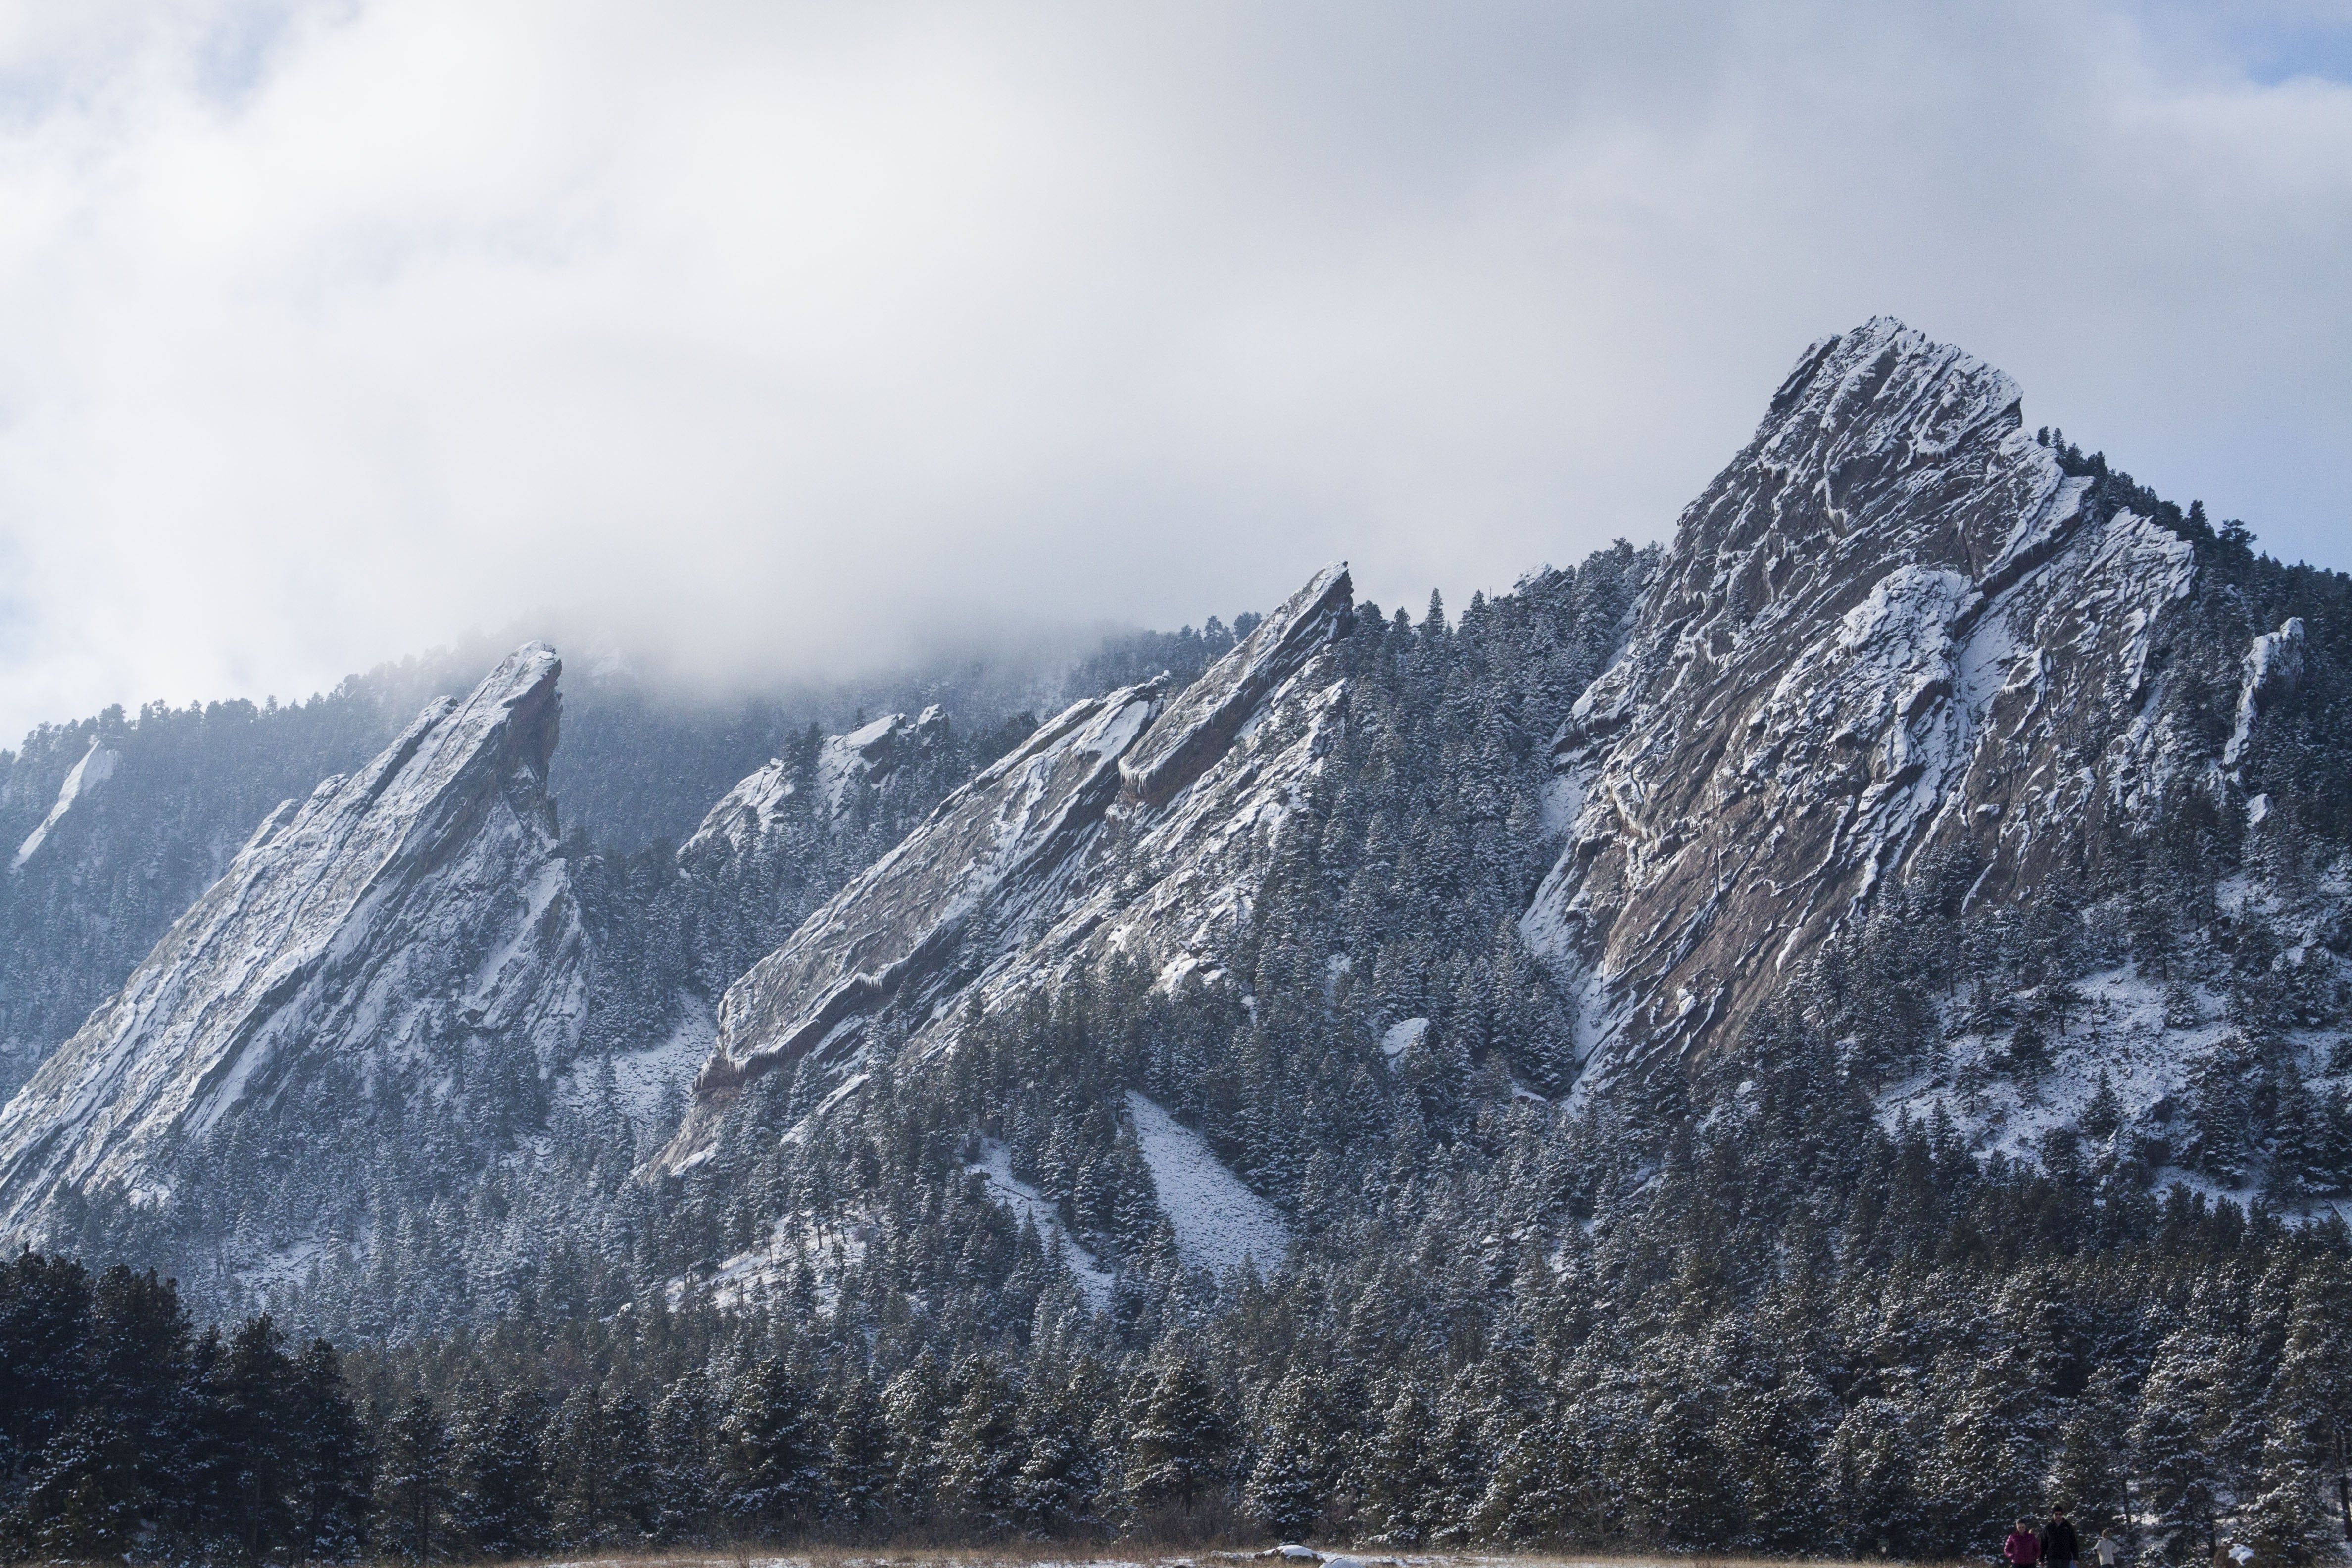 Boulder, CO. Flat Irons rock formation after first snow. Horizontal for desktop- more to follow